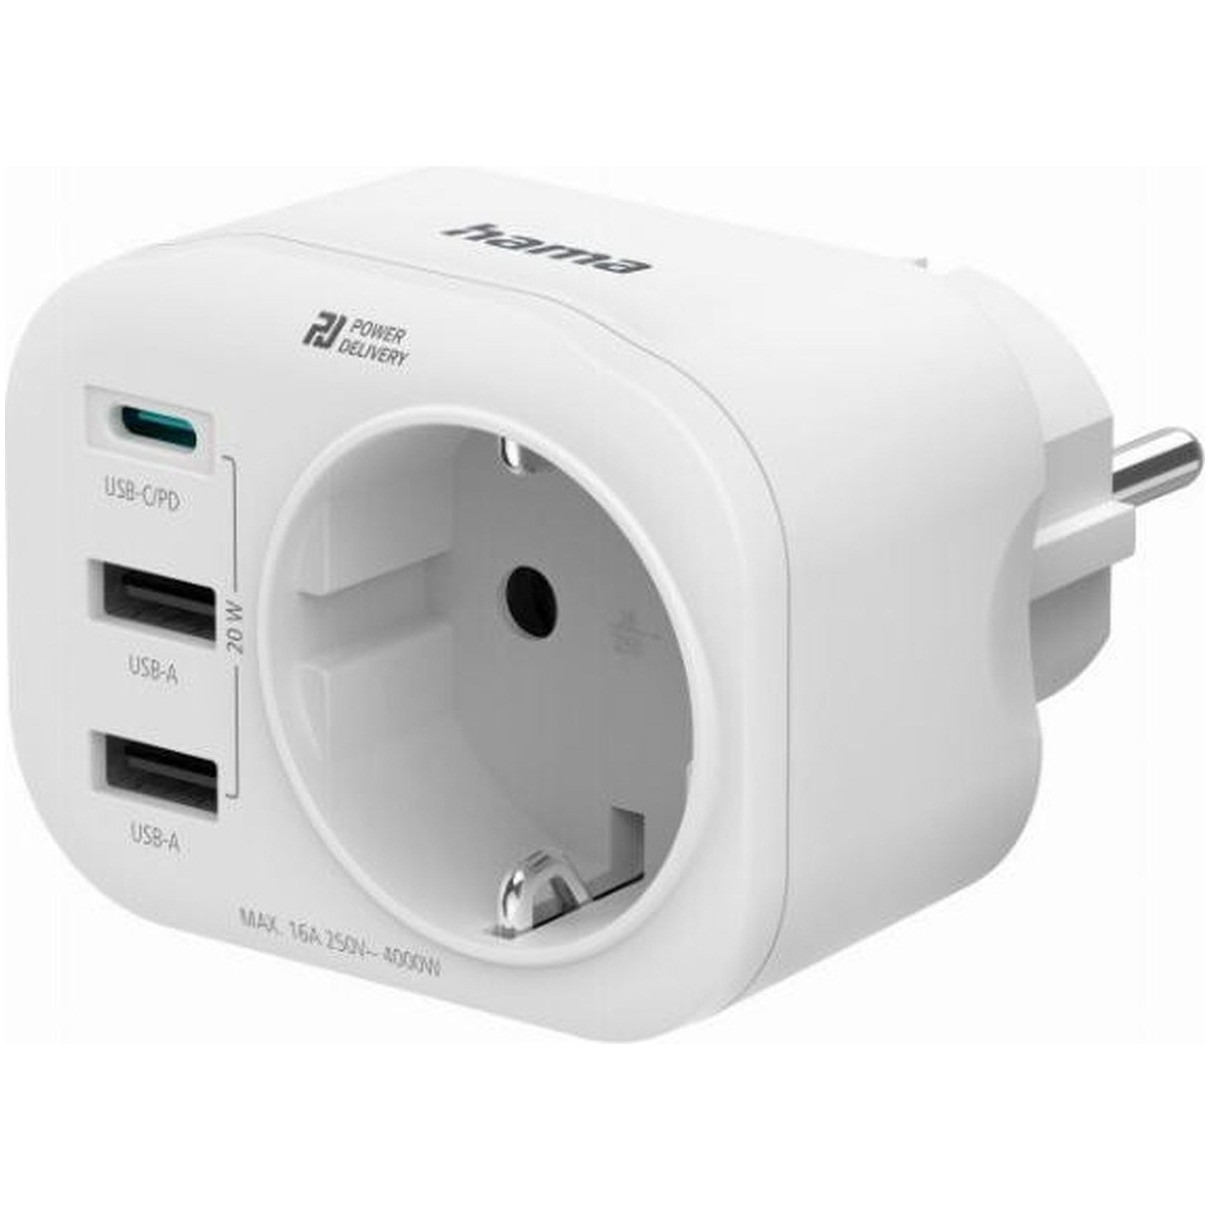 Hama 4-Way Multi-Adapter for Socket 1 USB-C PD 2 USB-A 1 Earthed Contact 20W Wifi adapter Wit